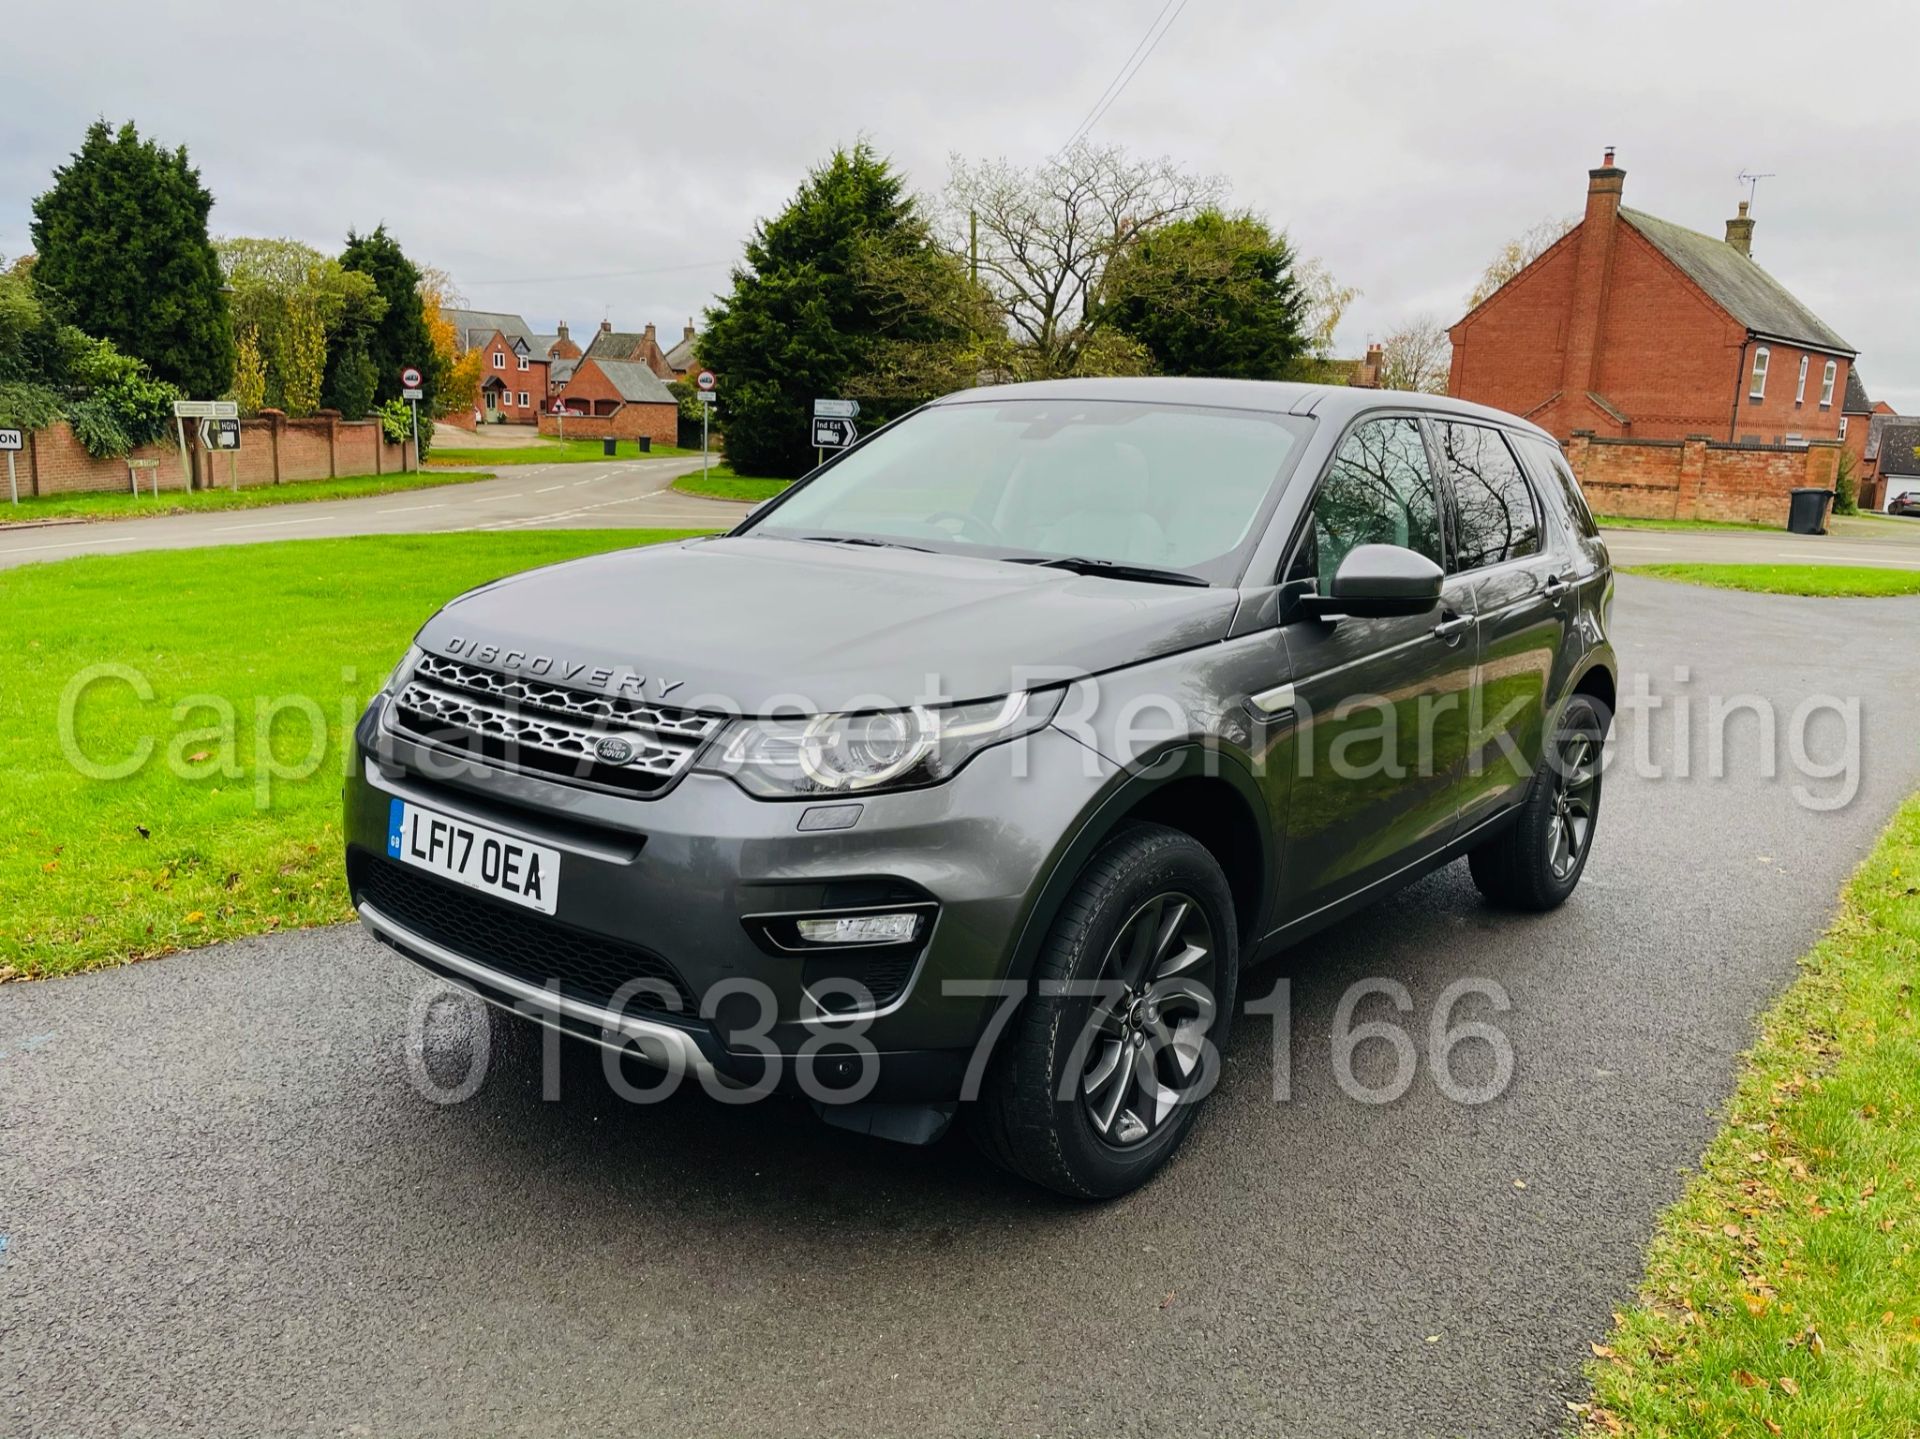 (ON SALE) LAND ROVER DISCOVERY *HSE EDITION* 7 SEATER (2017) '2.0 TD4 - AUTO - LEATHER - SAT NAV' - Image 5 of 64